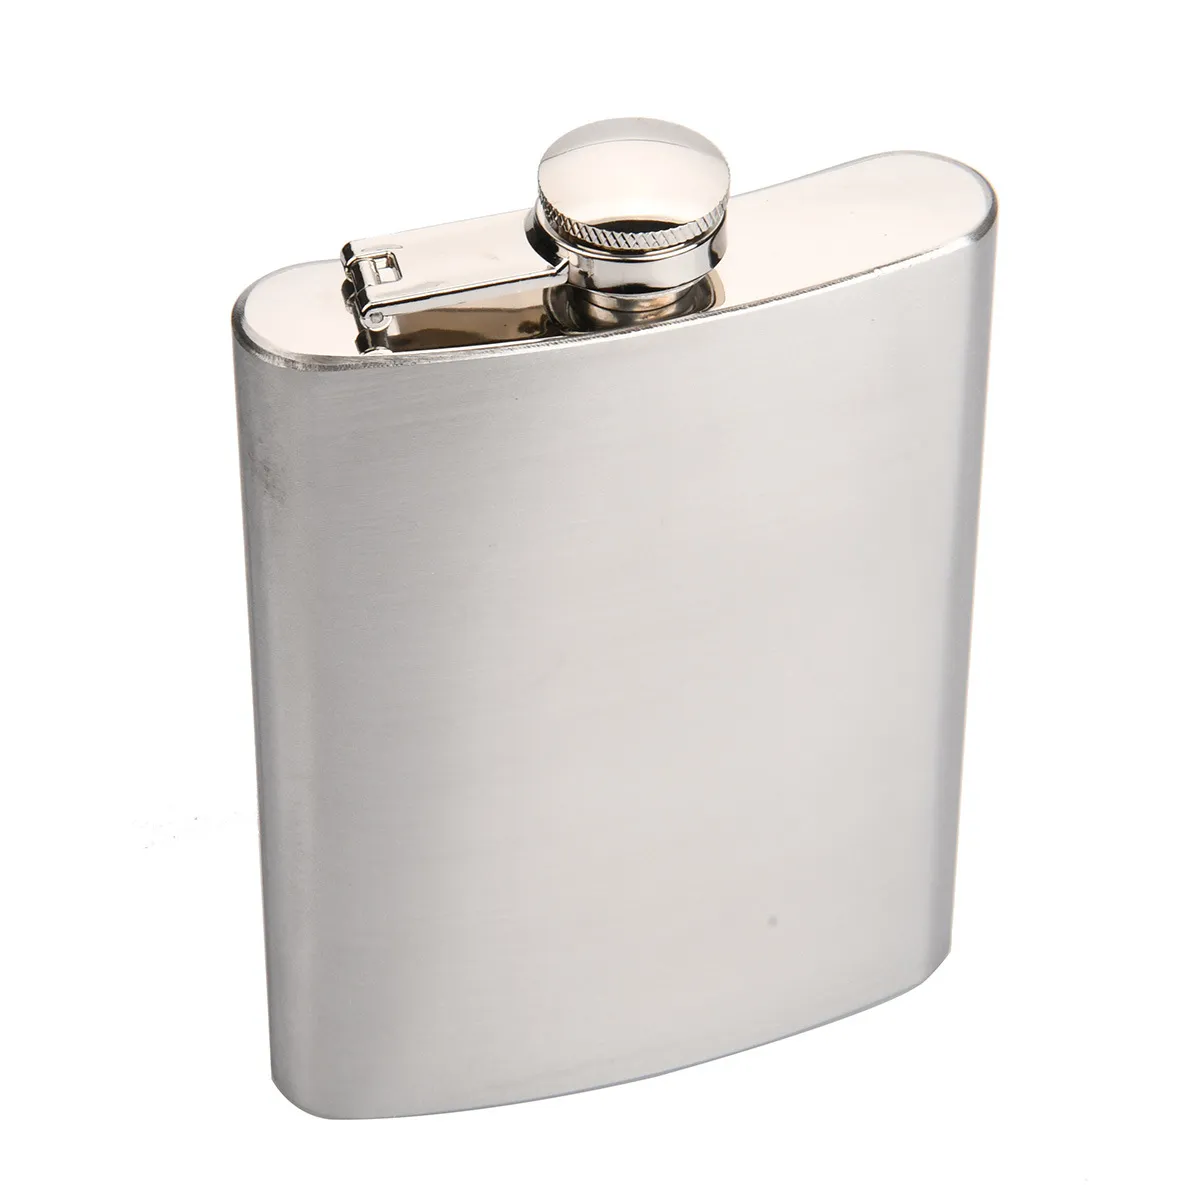 8oz Stainless Steel Hip Flask camping Portable Outdoor Flagon Whisky Stoup Wine Pot Alcohol Bottles Hip Flasks dh86